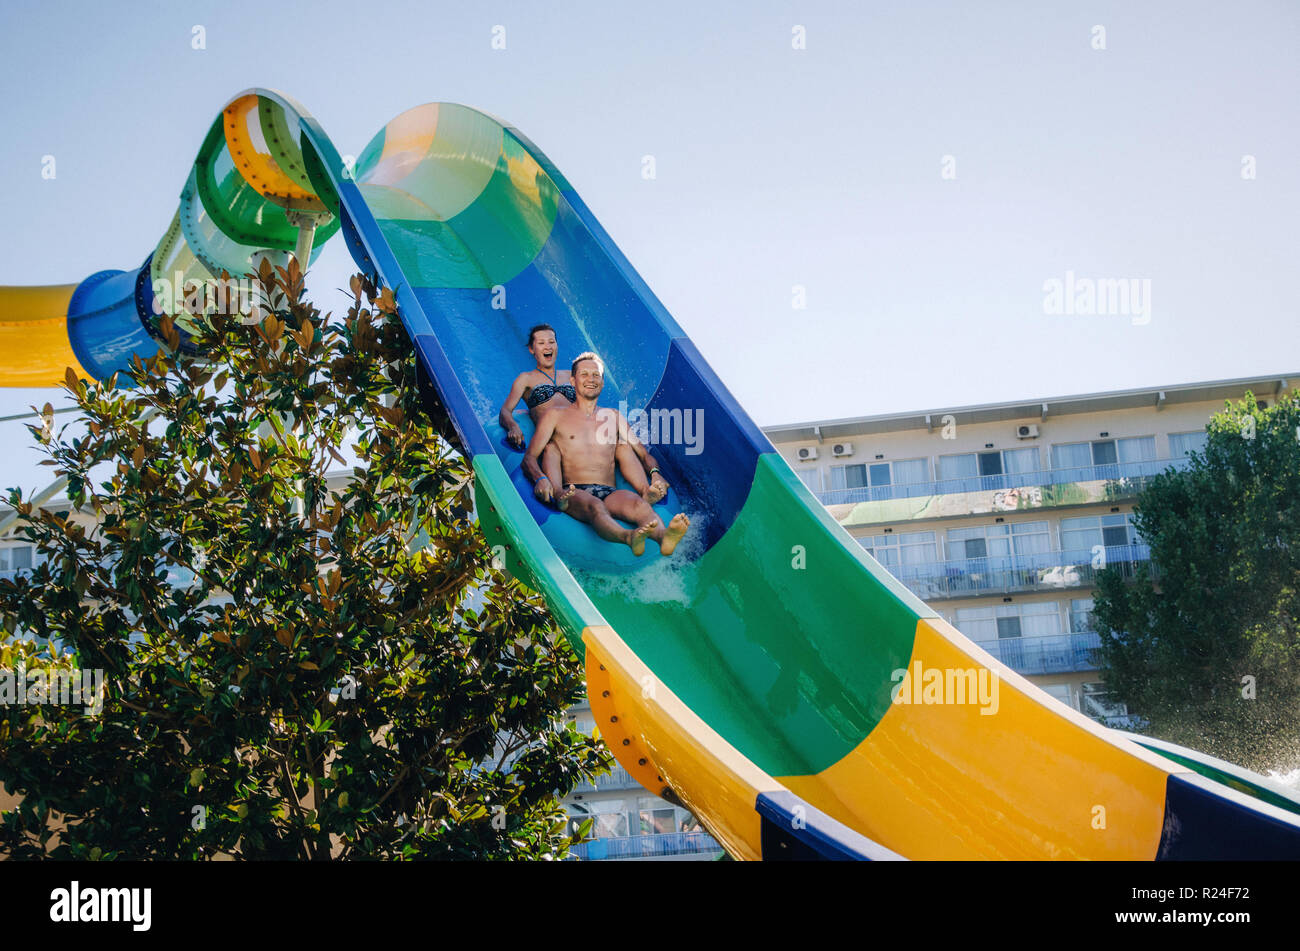 Funny couple taking a fast water ride on a float splashing water. Summer vacation with water park concept. Stock Photo